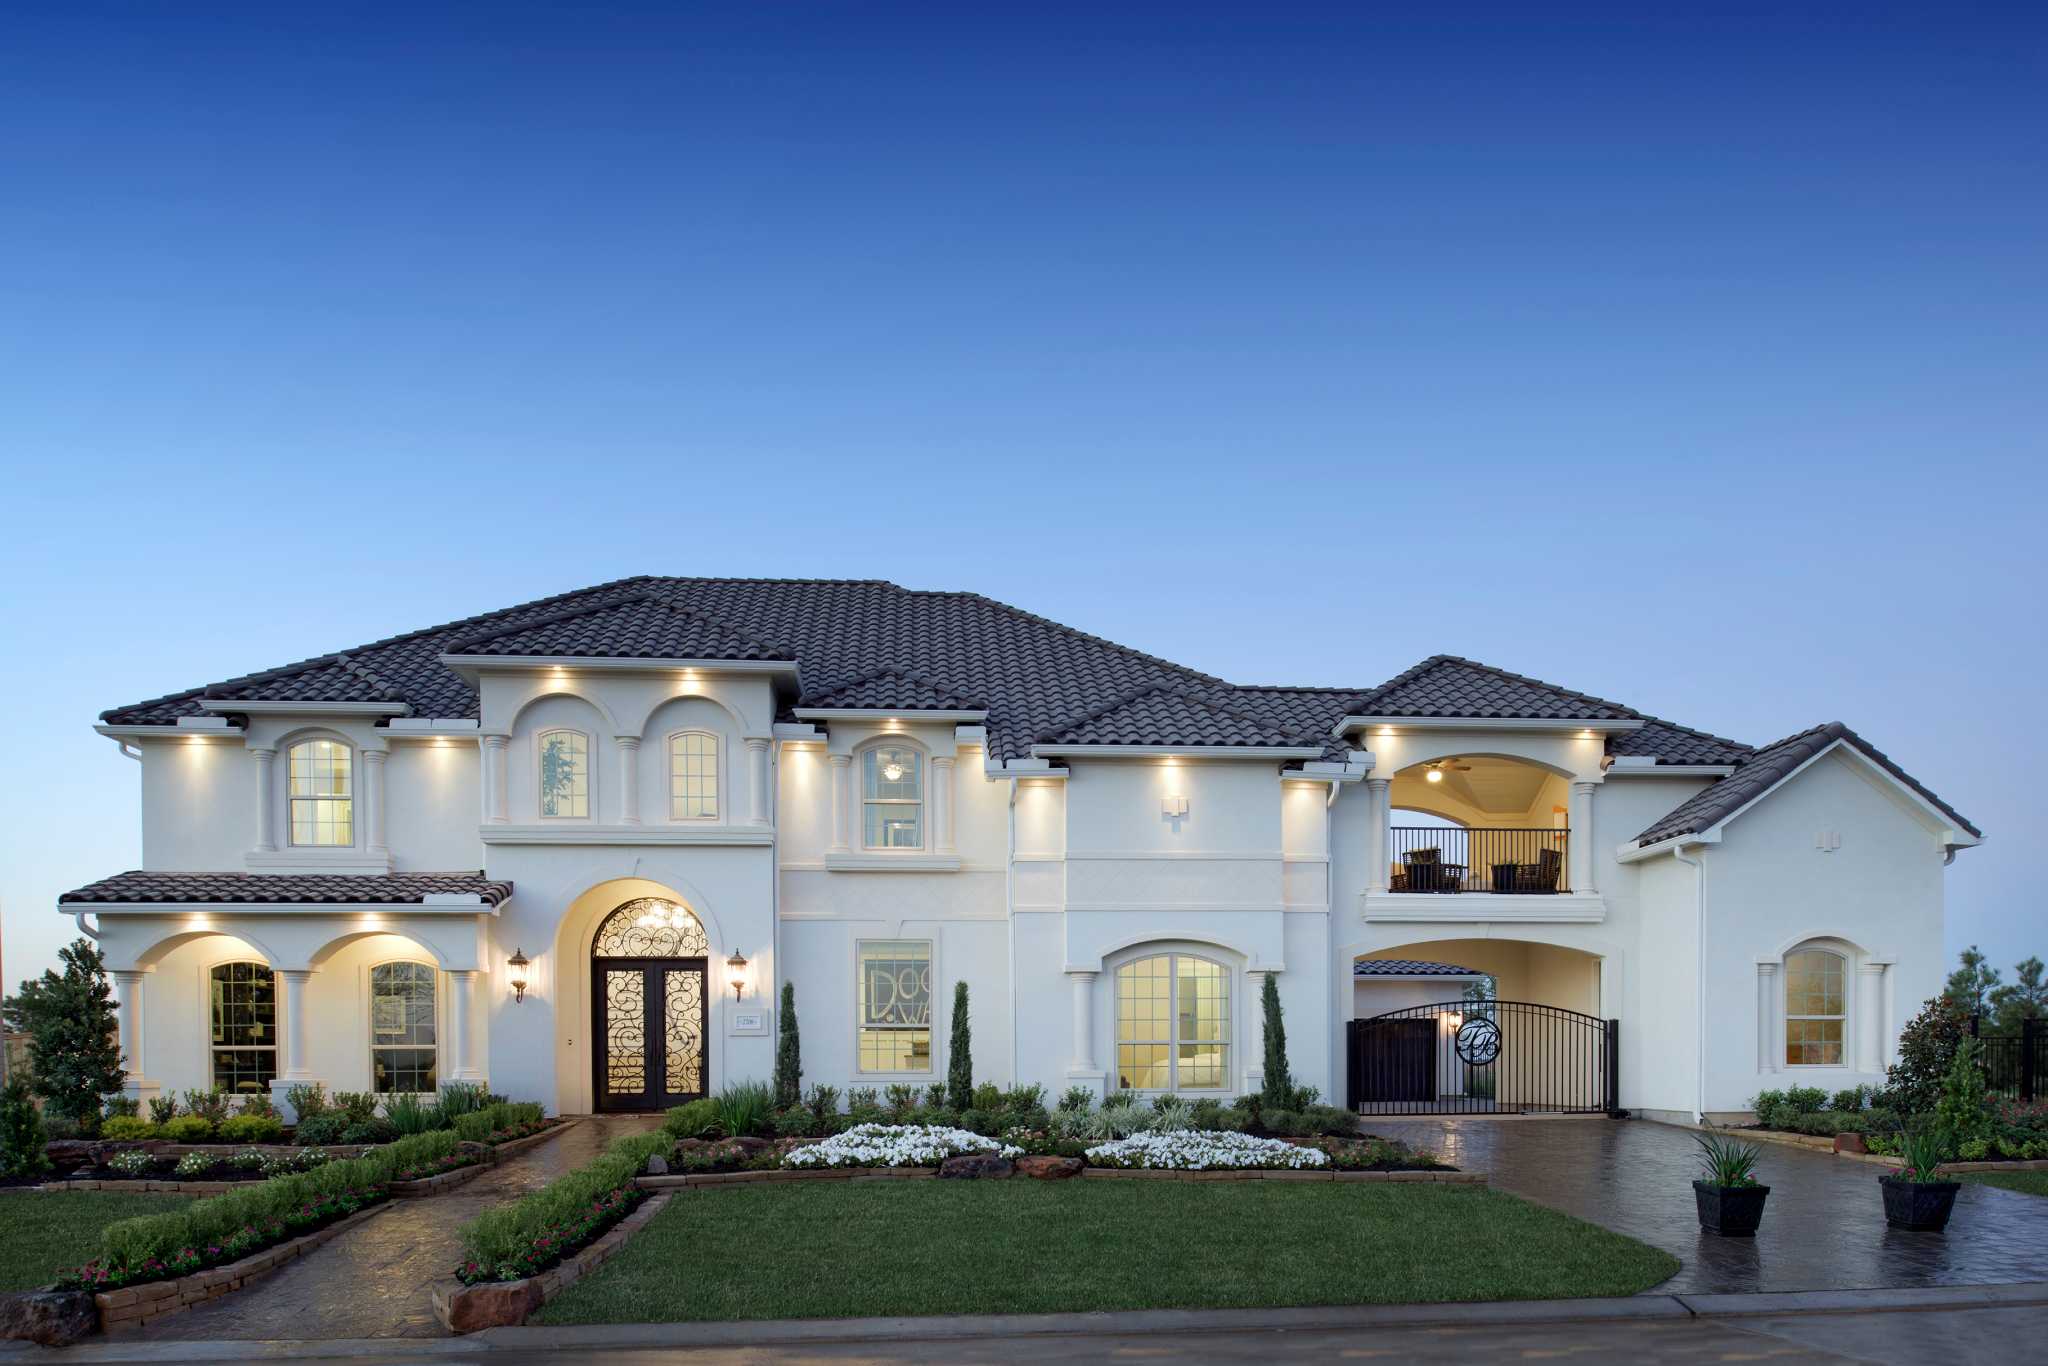 Builder's National Sales Event offers limited-time savings, incentives - Houston Chronicle2048 x 1366